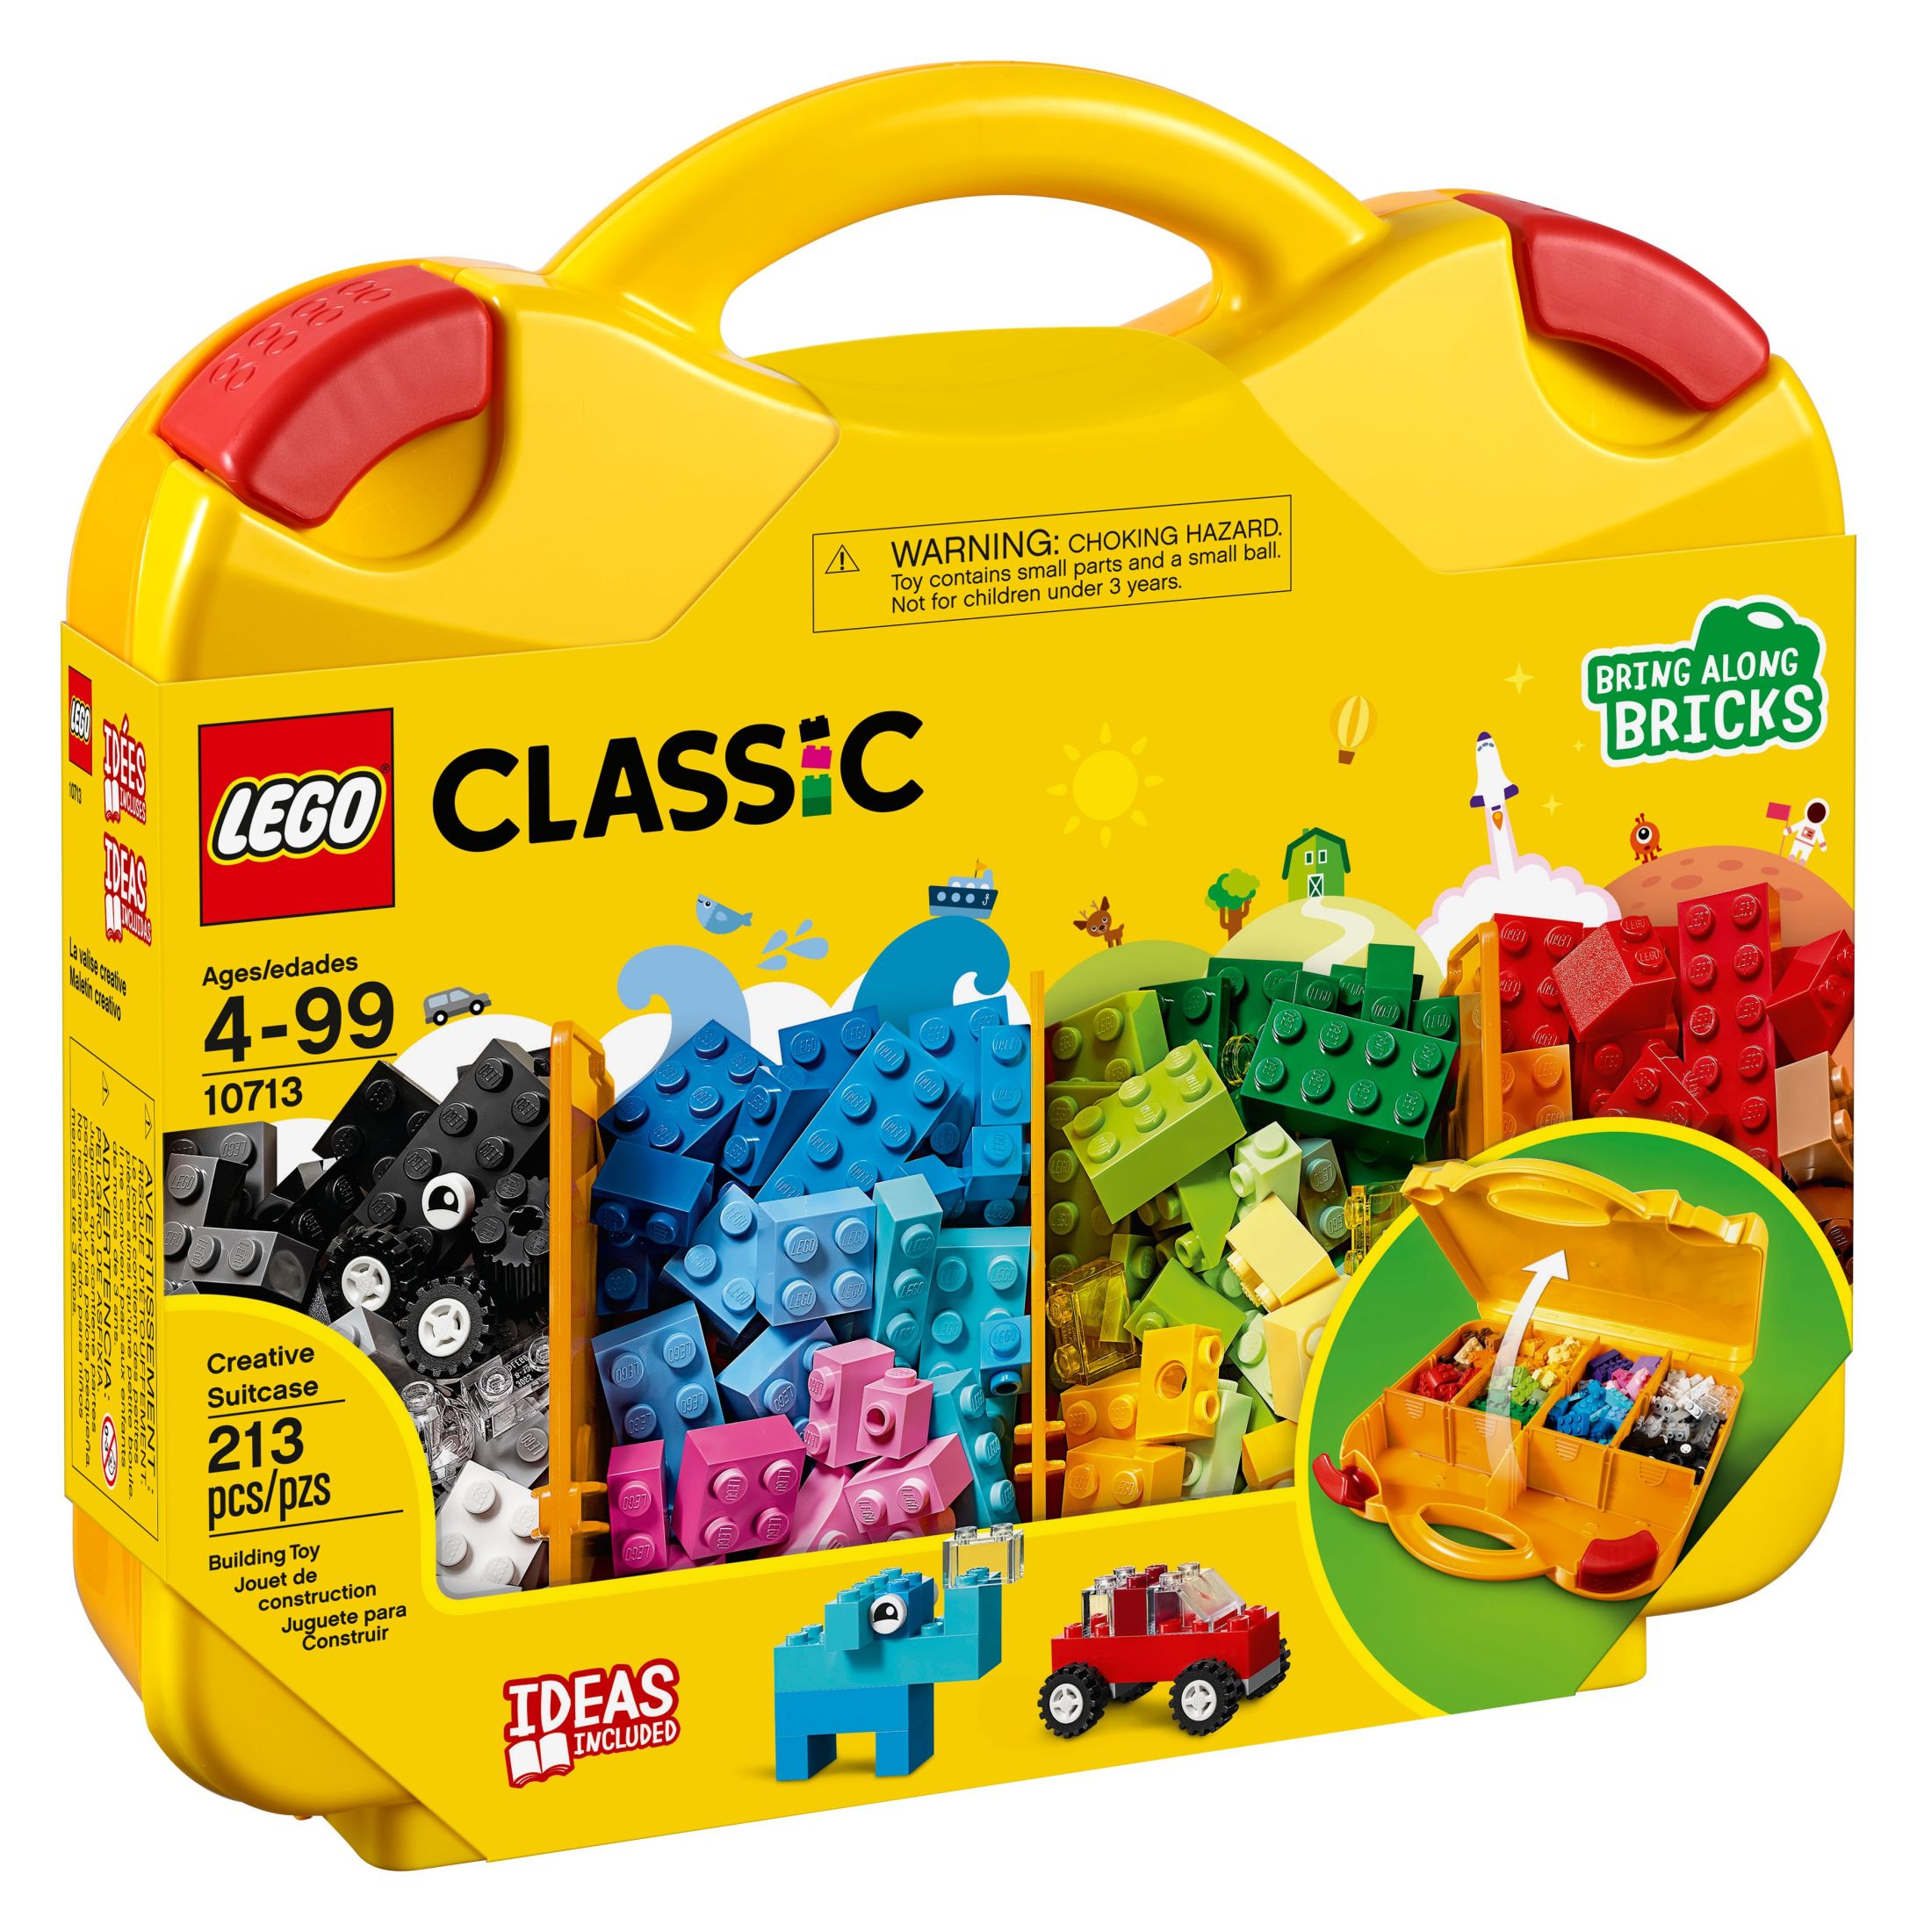 LEGO Classic Creative Suitcase 10713 - Includes Sorting Storage Organizer Case with Fun Colorful Building Bricks, Preschool Learning Toy for Kids to Play and Be Inspired by LEGO Masters - image 3 of 7